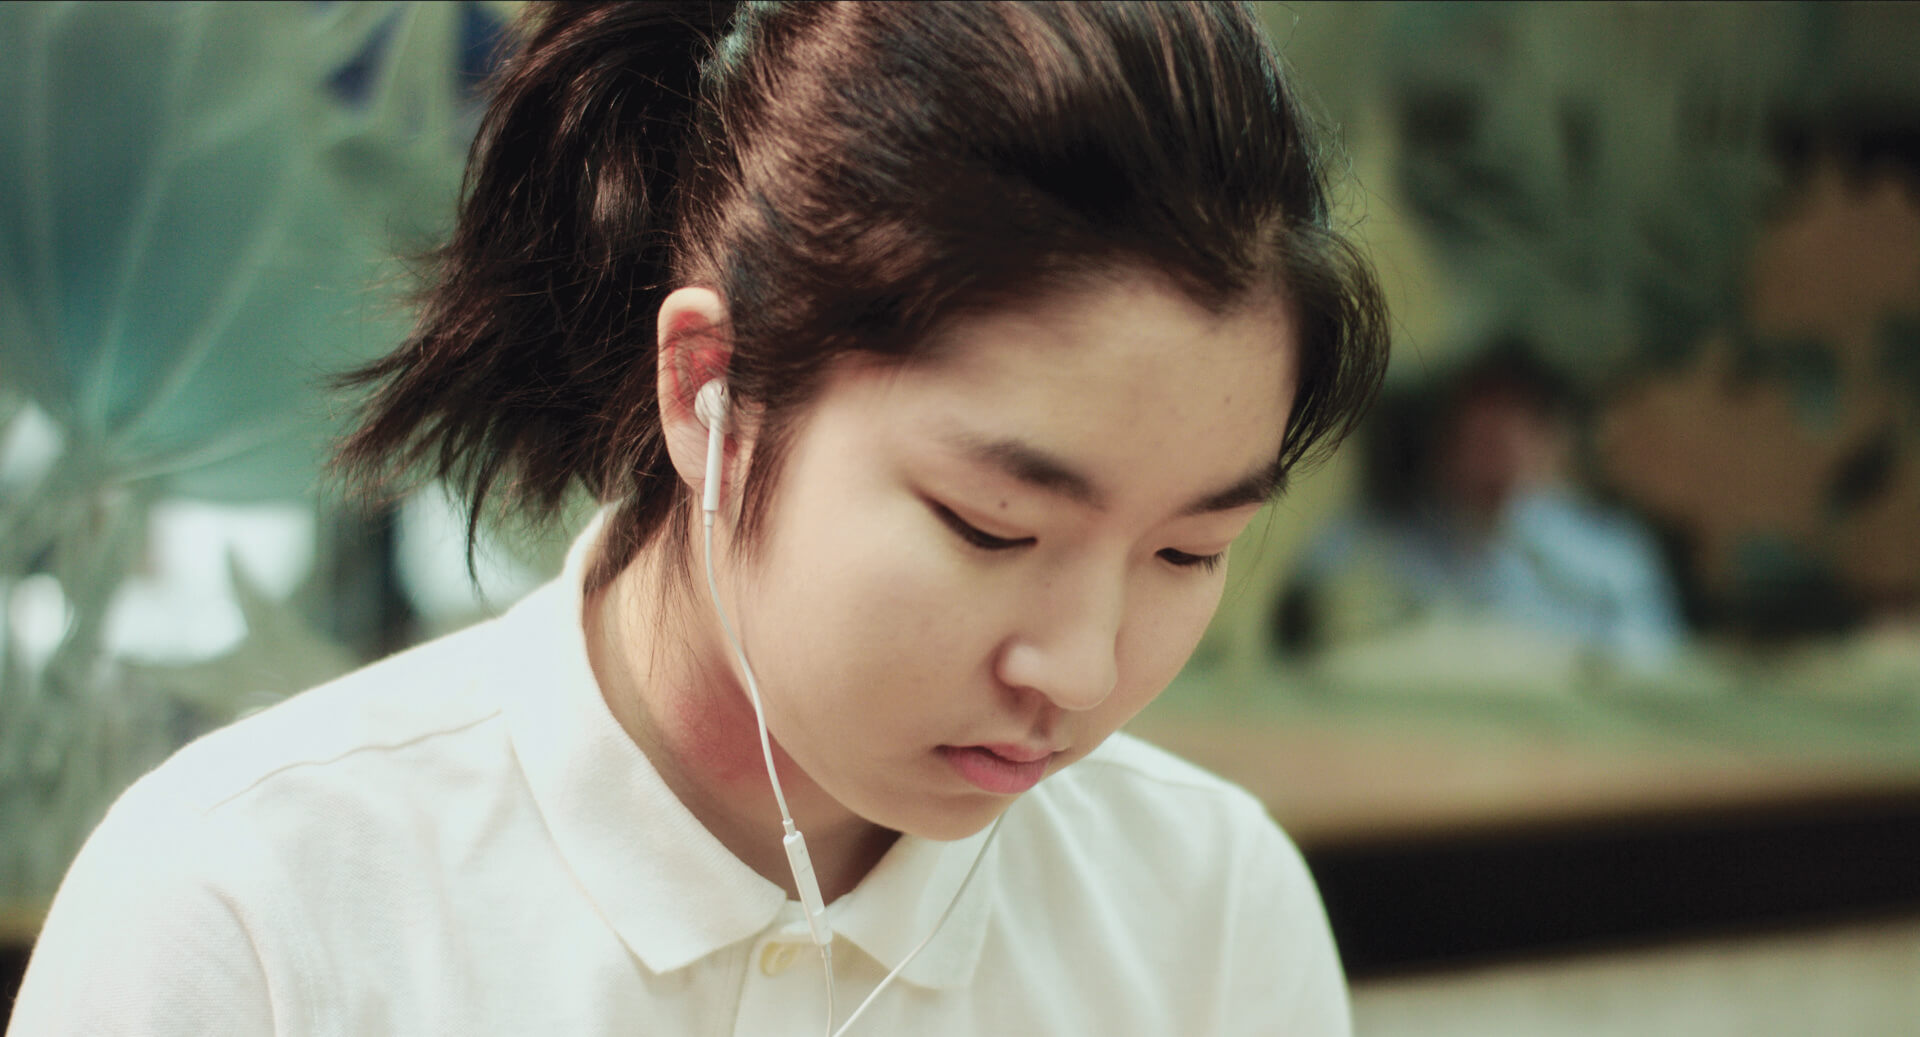 A girl's face is in focus as she listens through her earphones and looks down with an emotionless face.